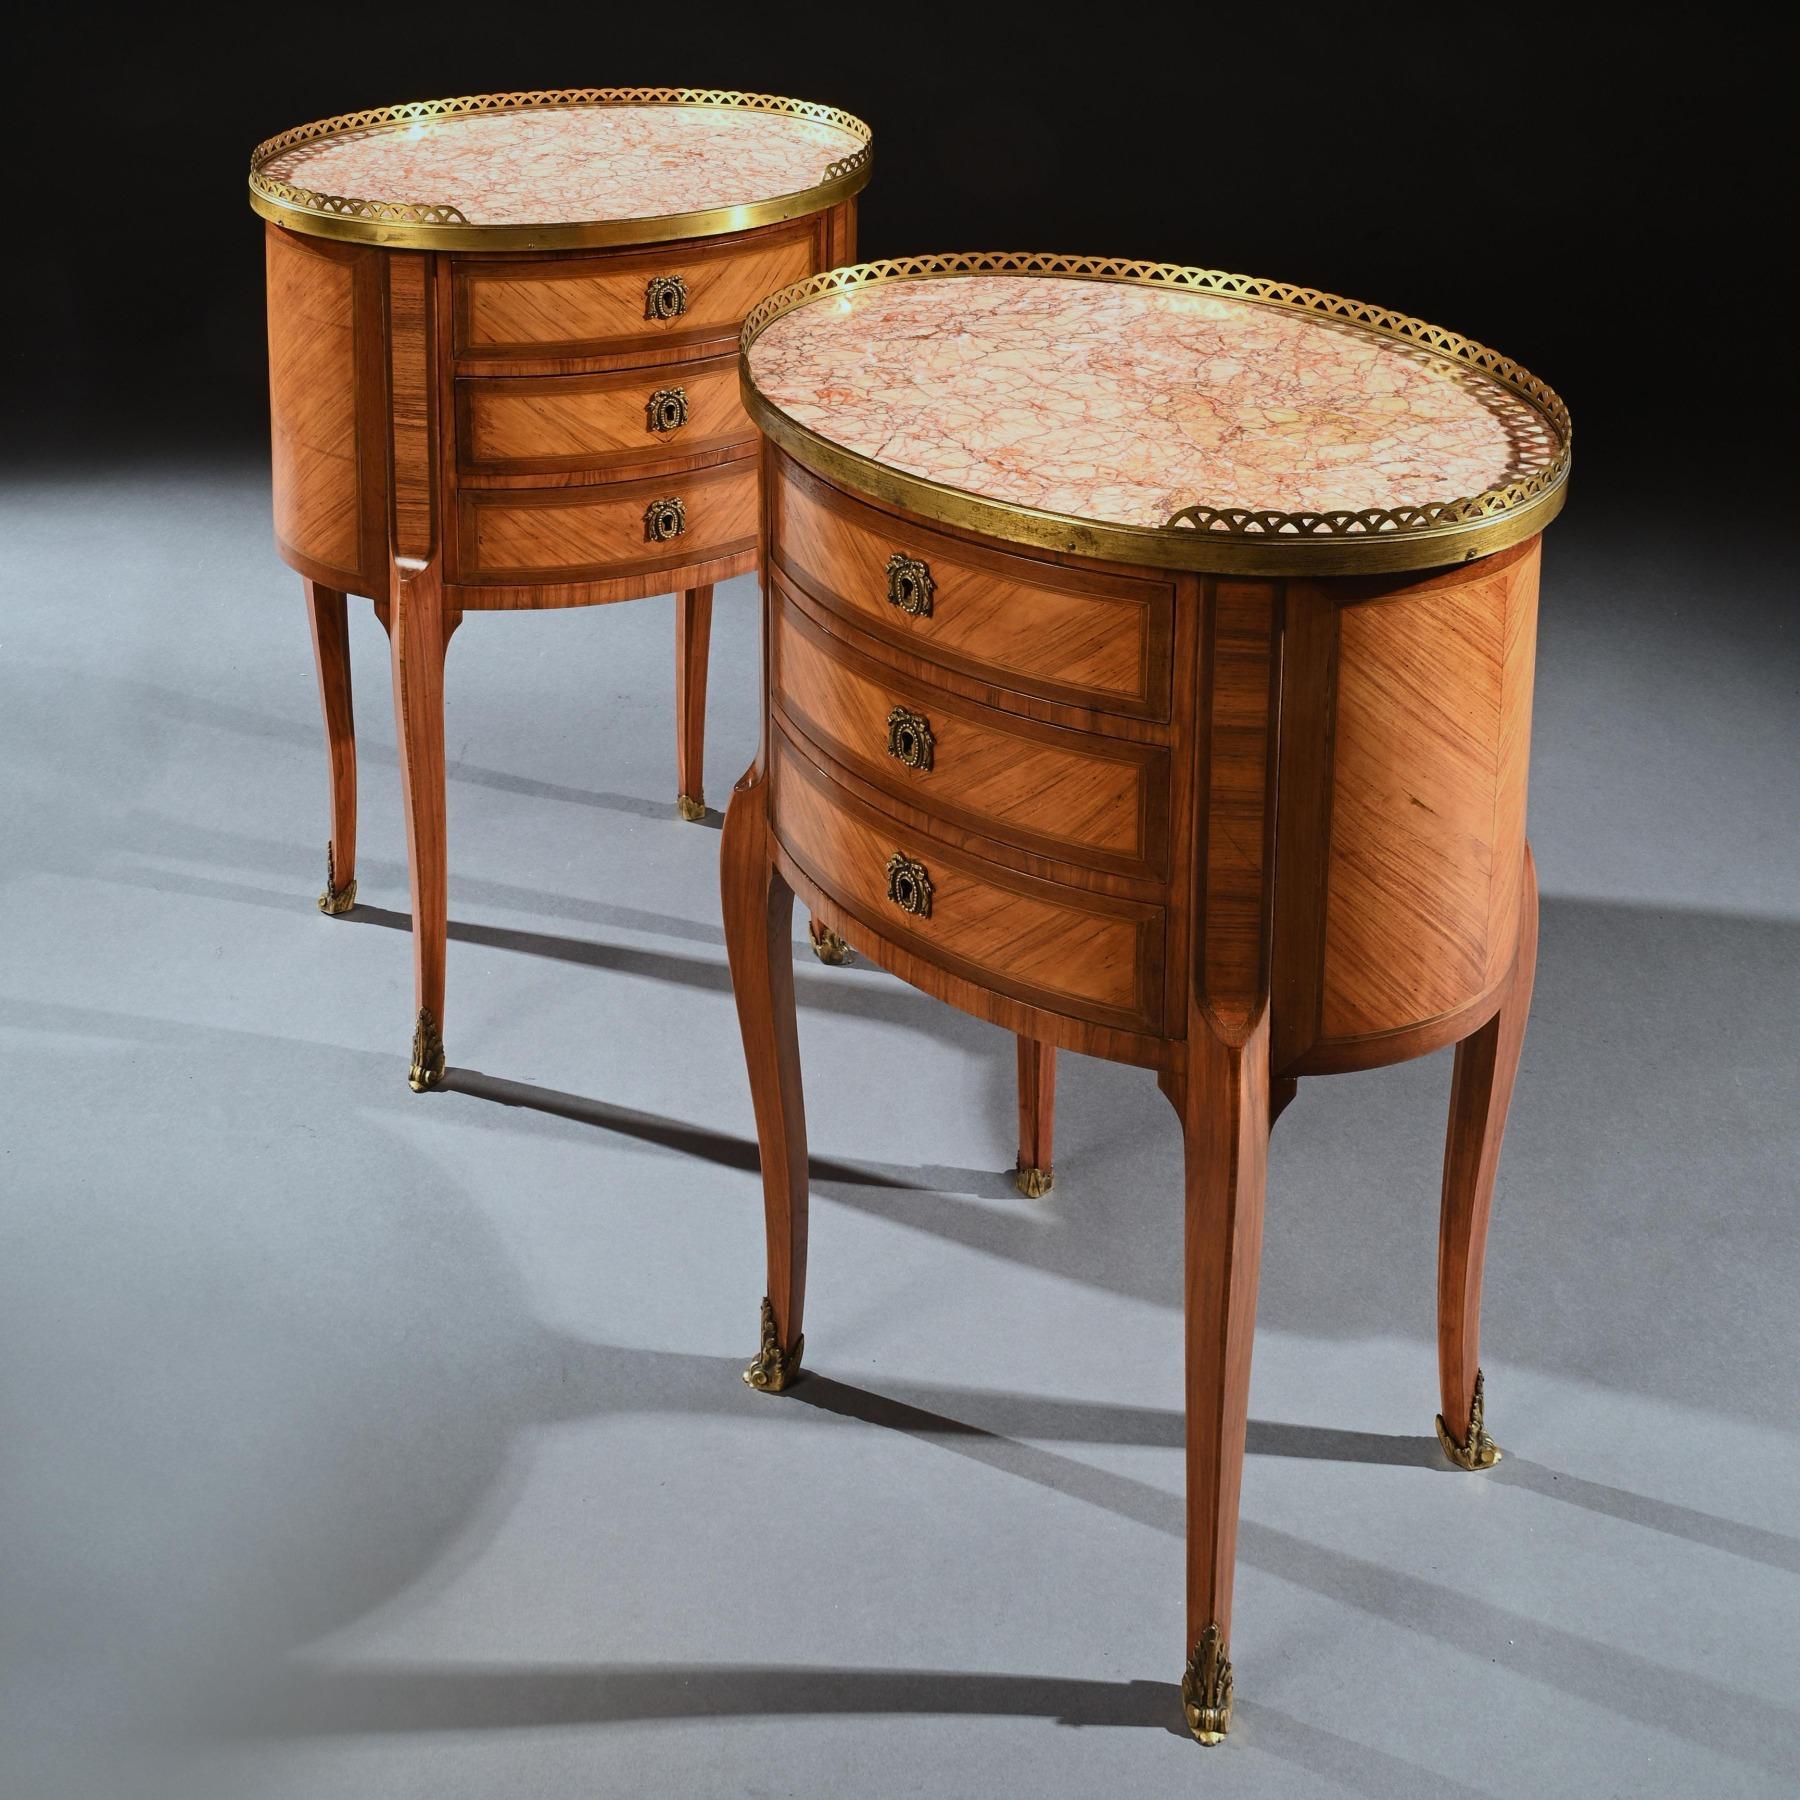 Pair of Late 19th Century Oval Kingwood and Marble Bed Side Tables, by P Chorier 1